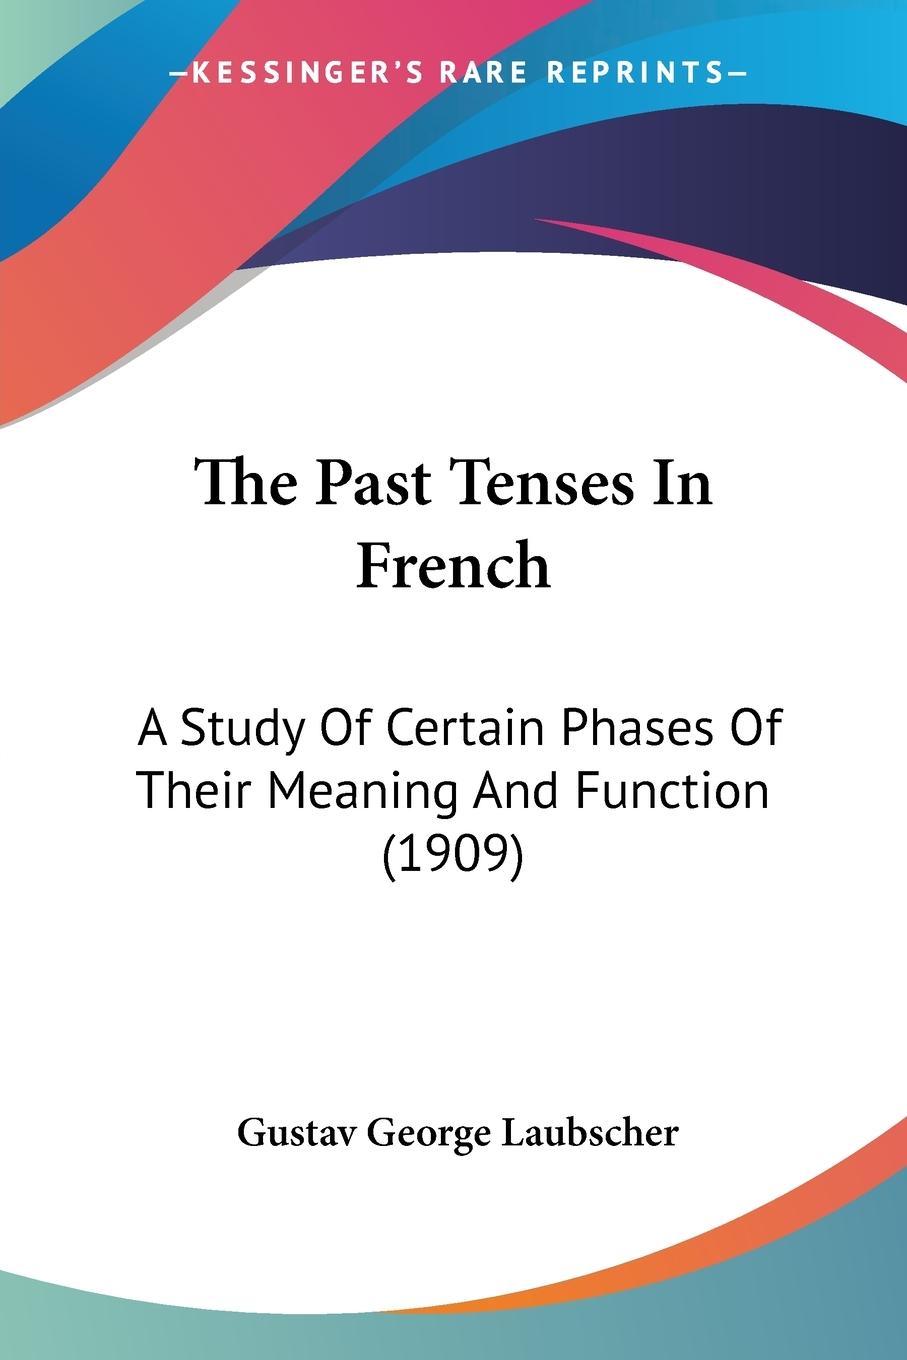 The Past Tenses In French - Laubscher, Gustav George